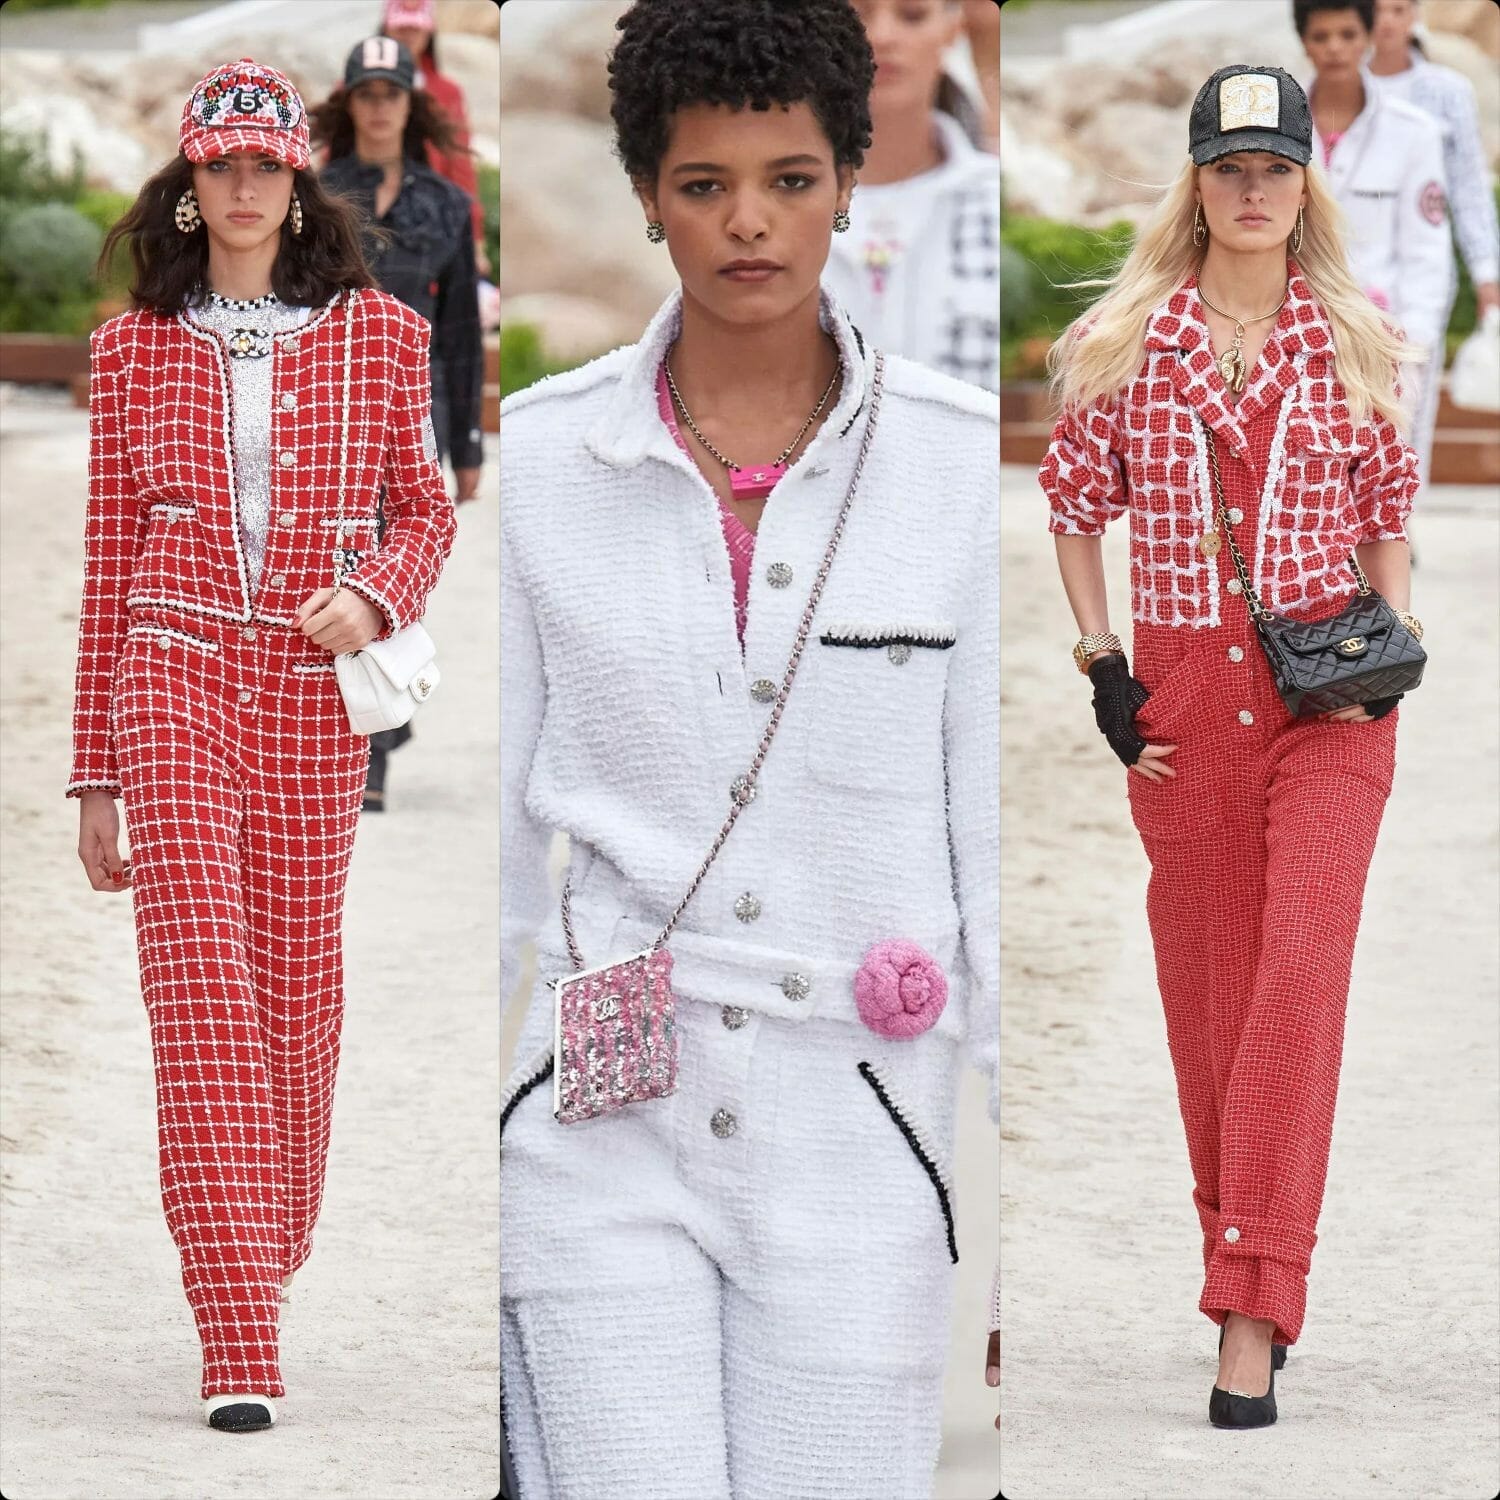 Highlights from Chanel's cruise 2023 show in Monaco